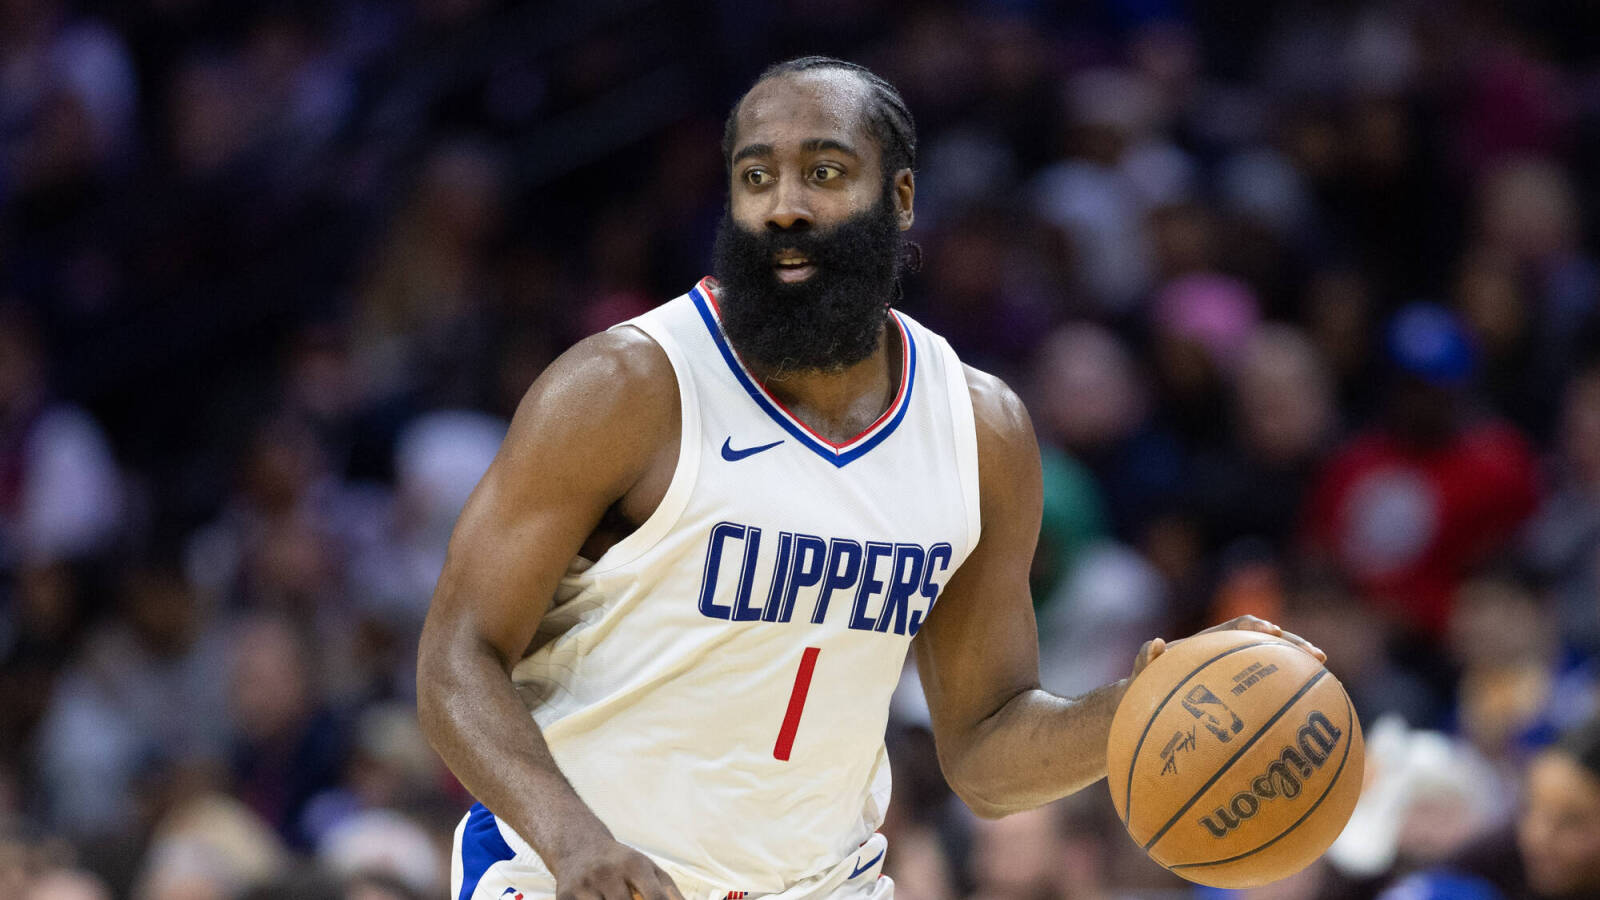 Watch: James Harden has no idea why Sixers fans booed him